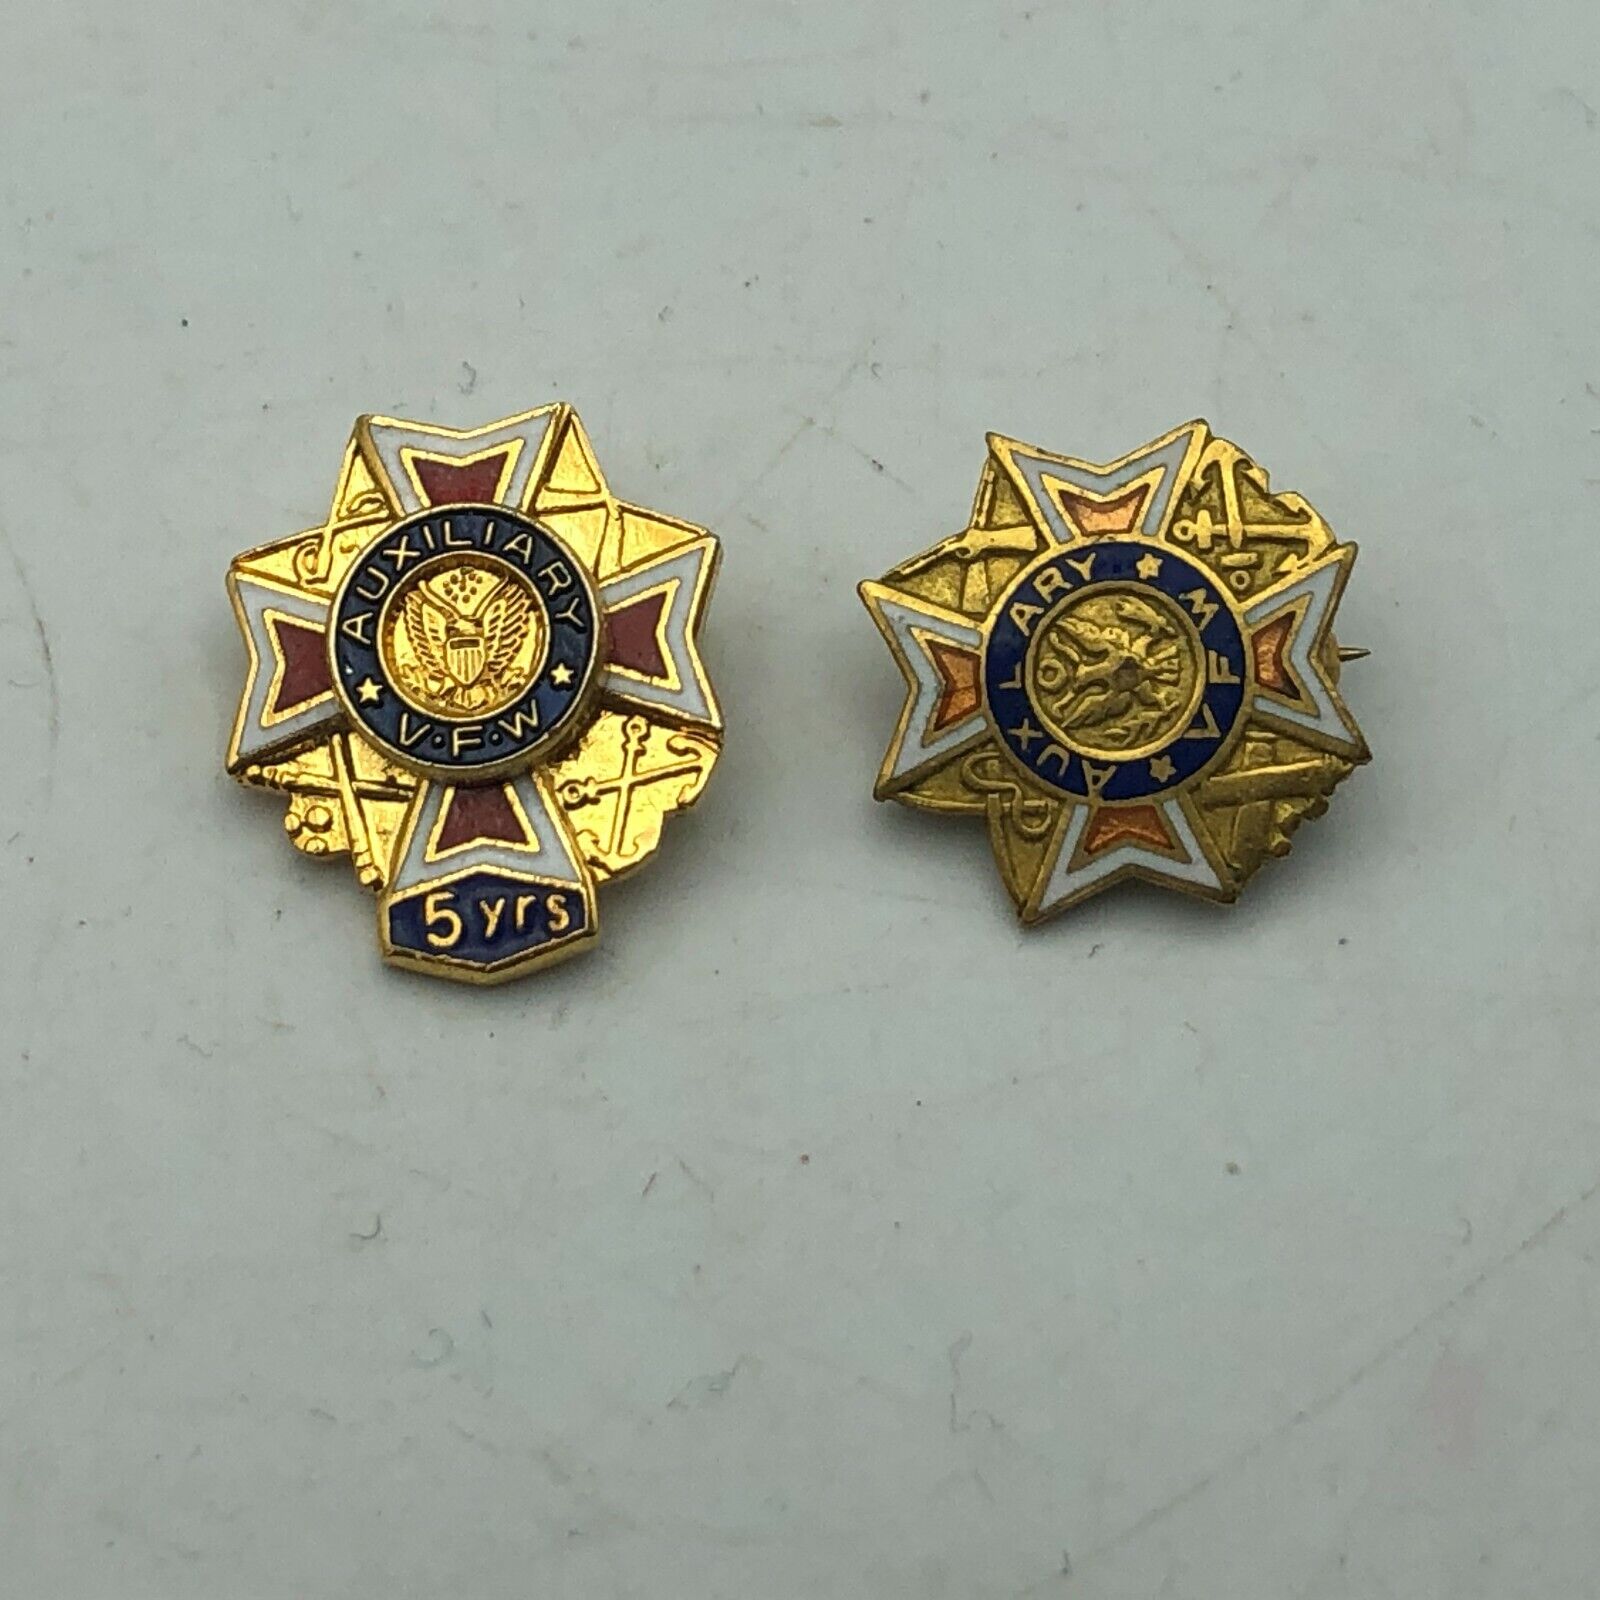 VFW Auxiliary Lapel Pin Lot Vintage Whitehead + Hoag Plus Unmarked 5 Year Award